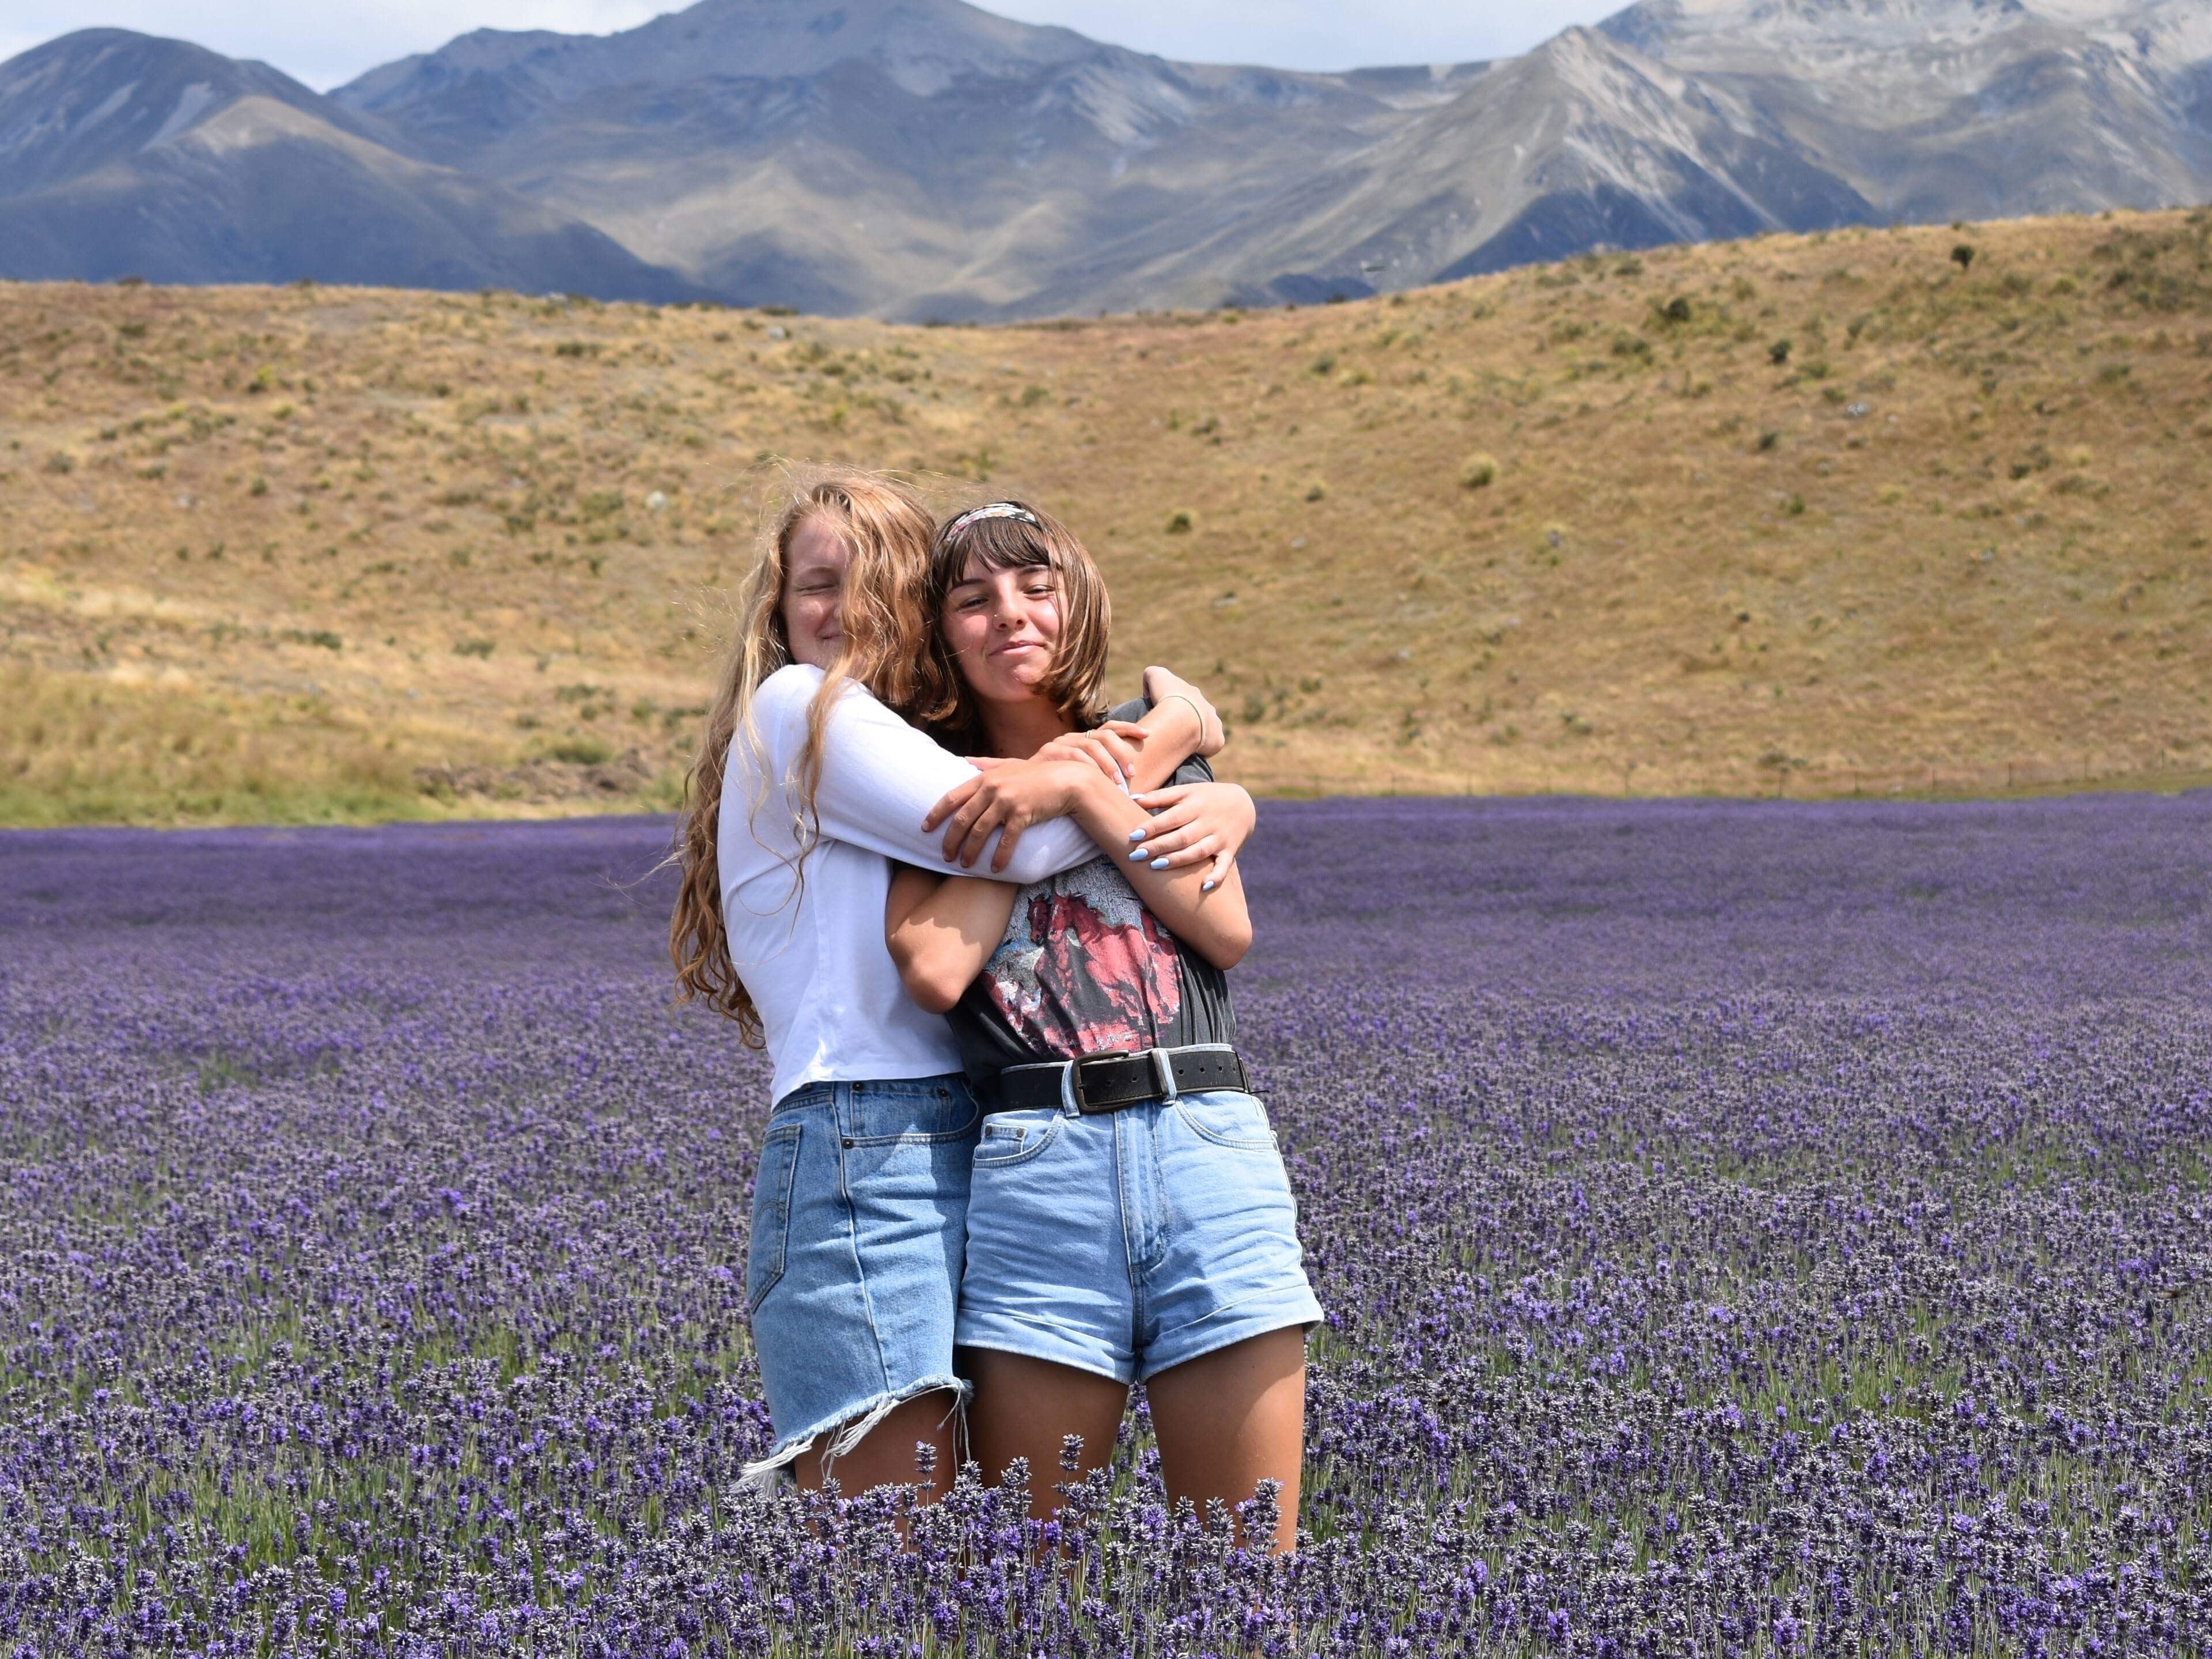 Sisters Hugging in a Lavender Field - Sibling Photoshoot Idea